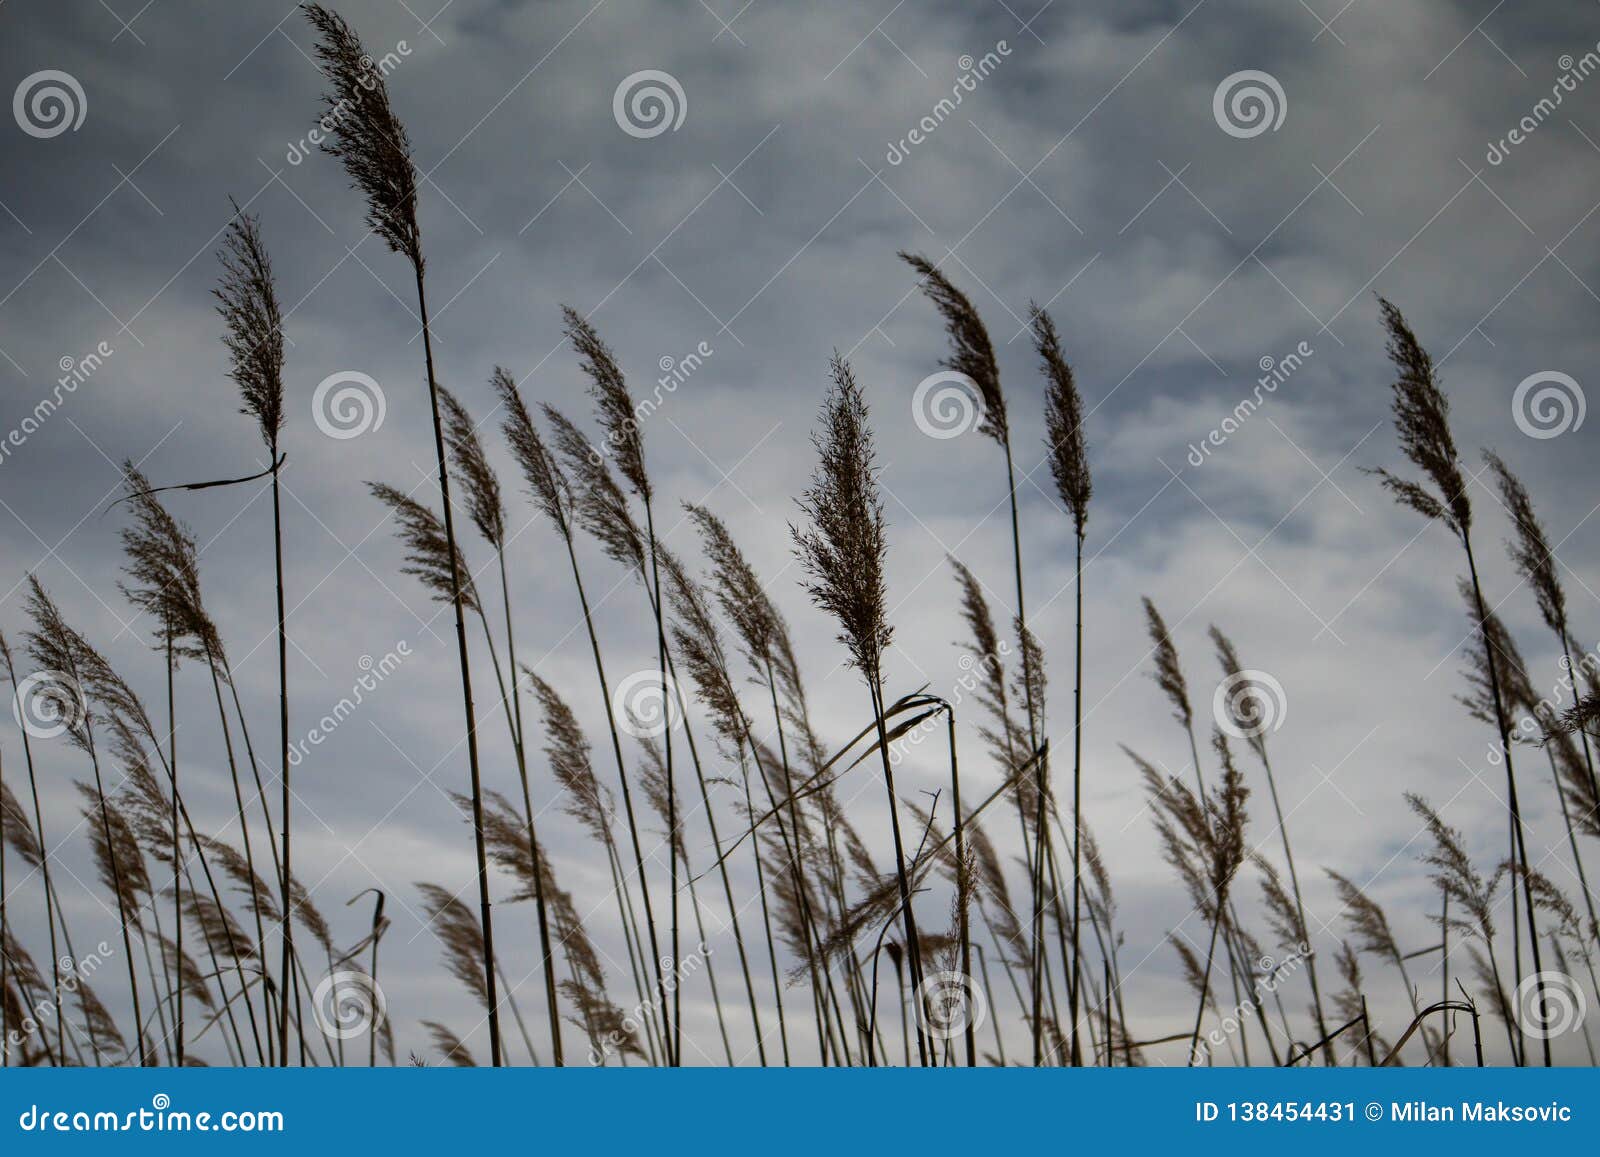 Beautiful Wallpaper of Dry Reed Plant with Dark Clouds in the Background  Stock Image - Image of golden, branch: 138454431